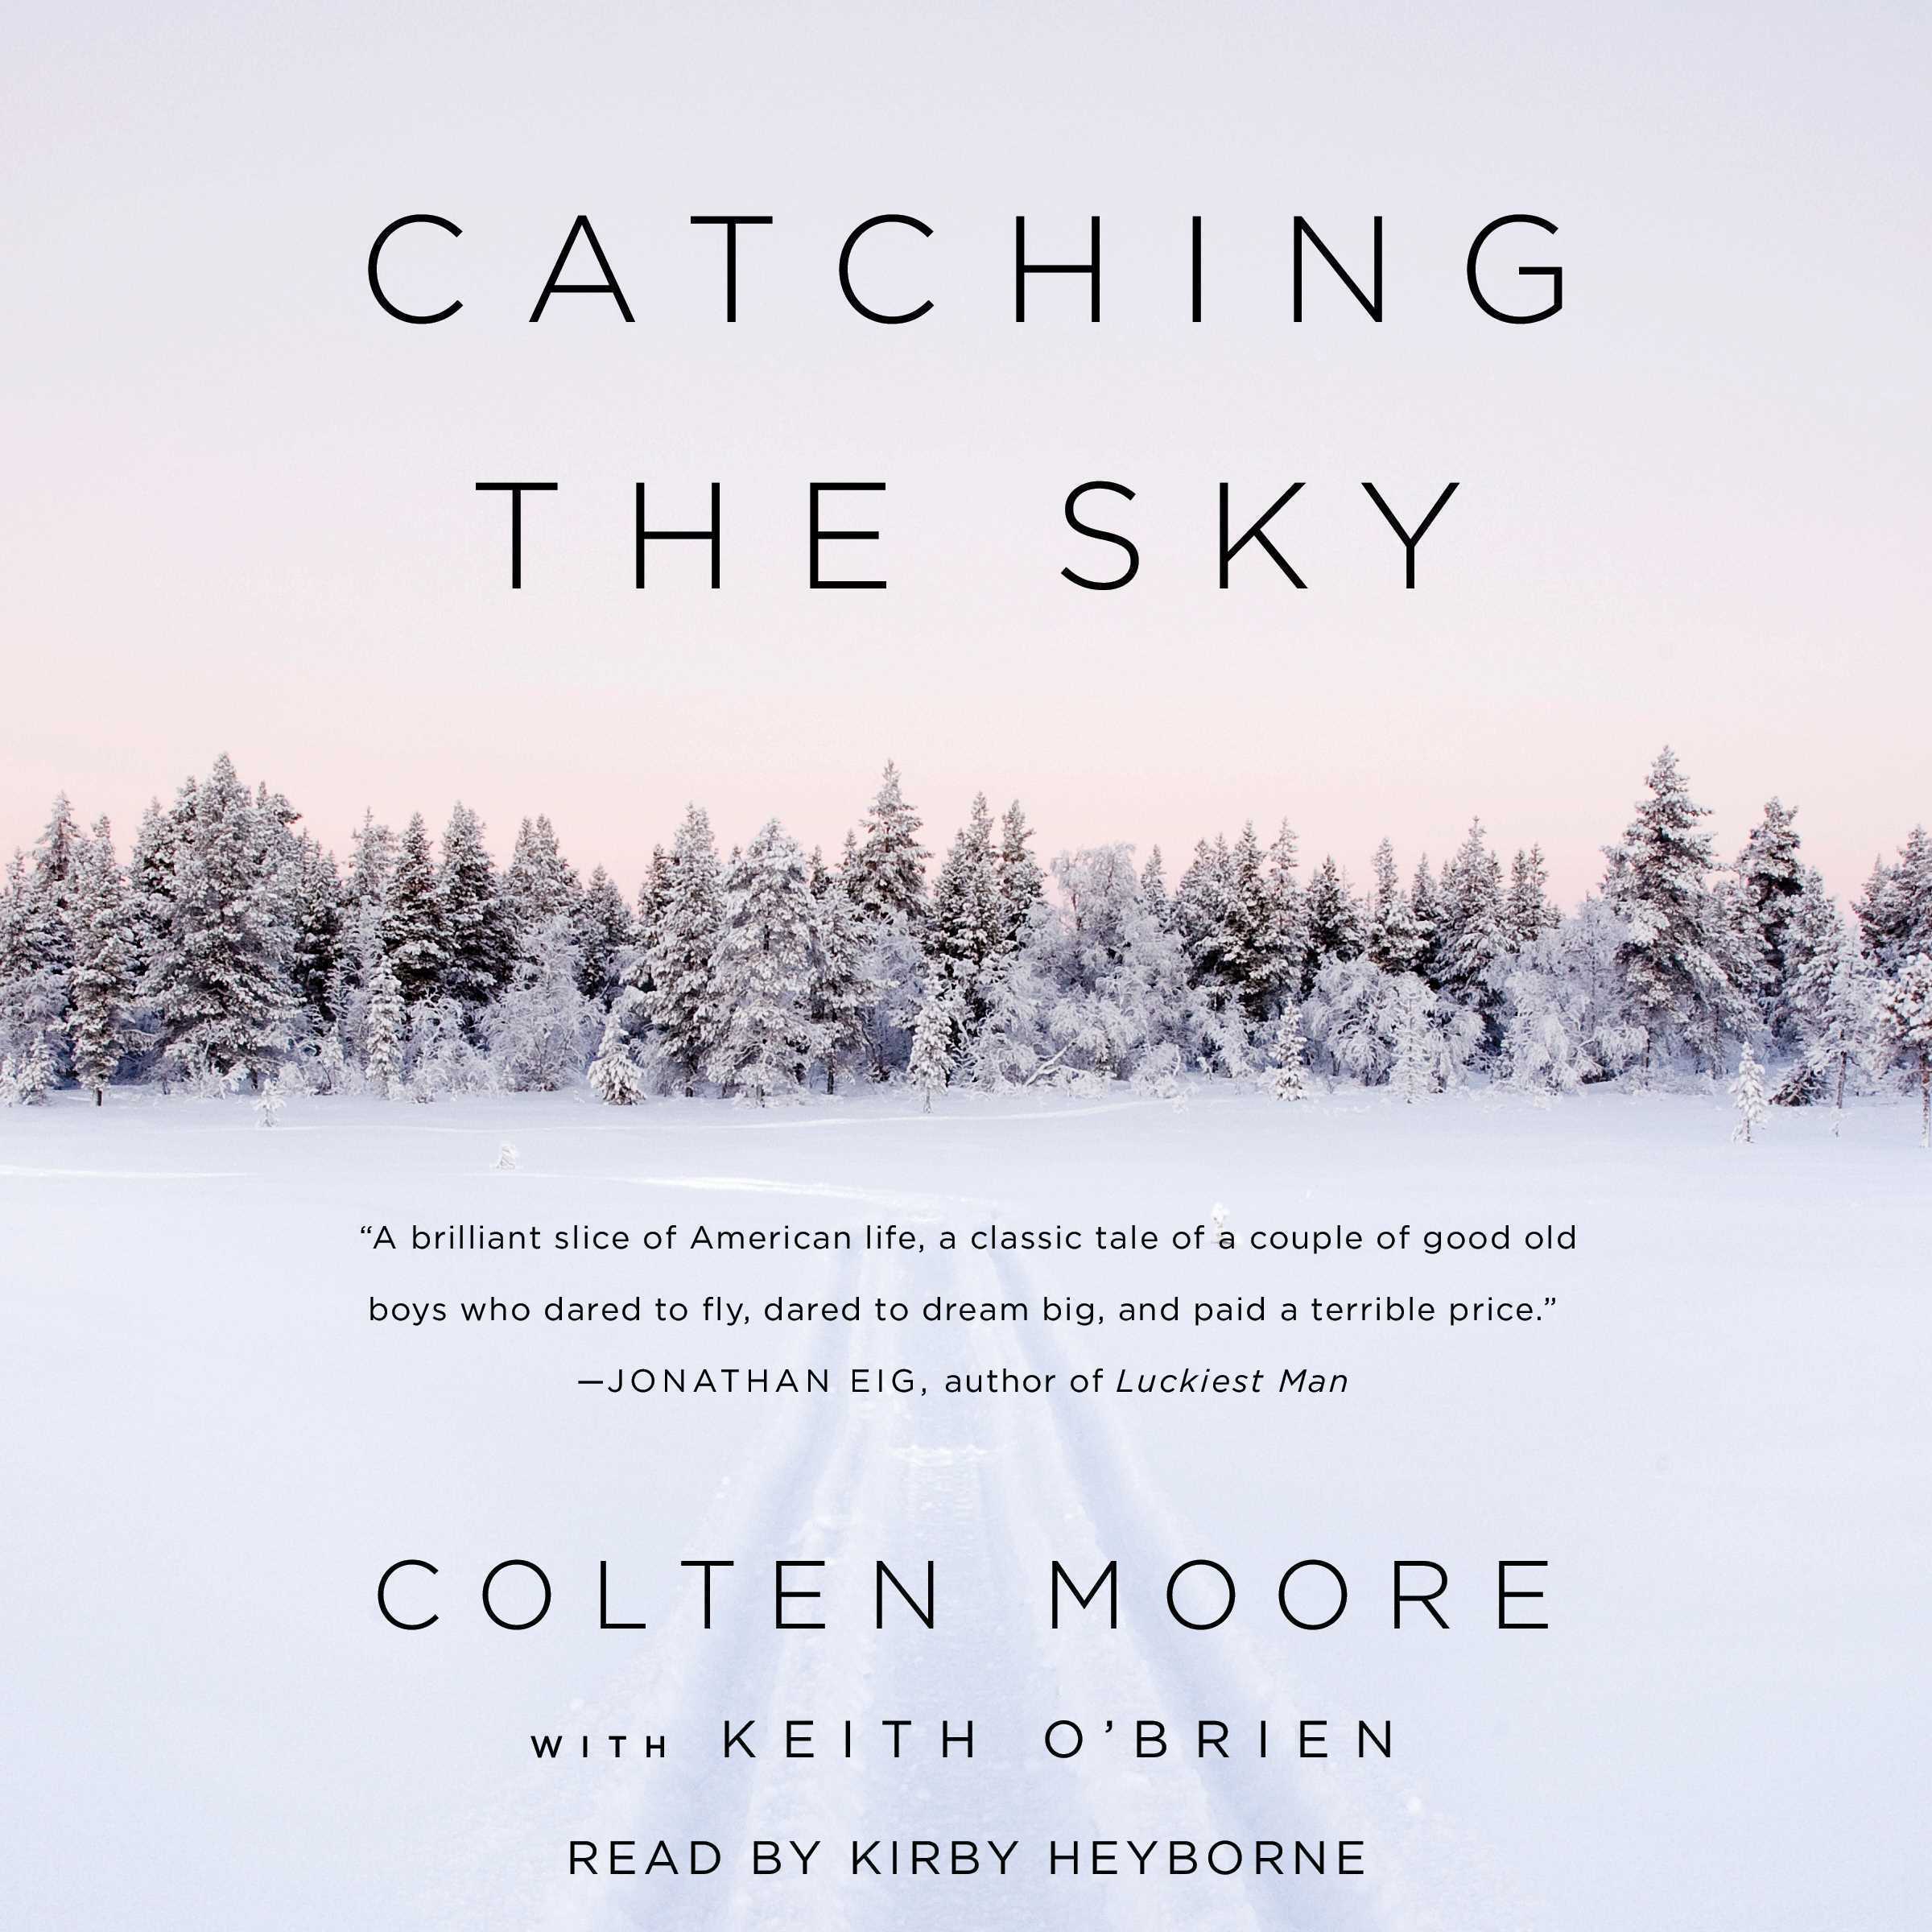 Catching the Sky - Audiobook | Listen Instantly!